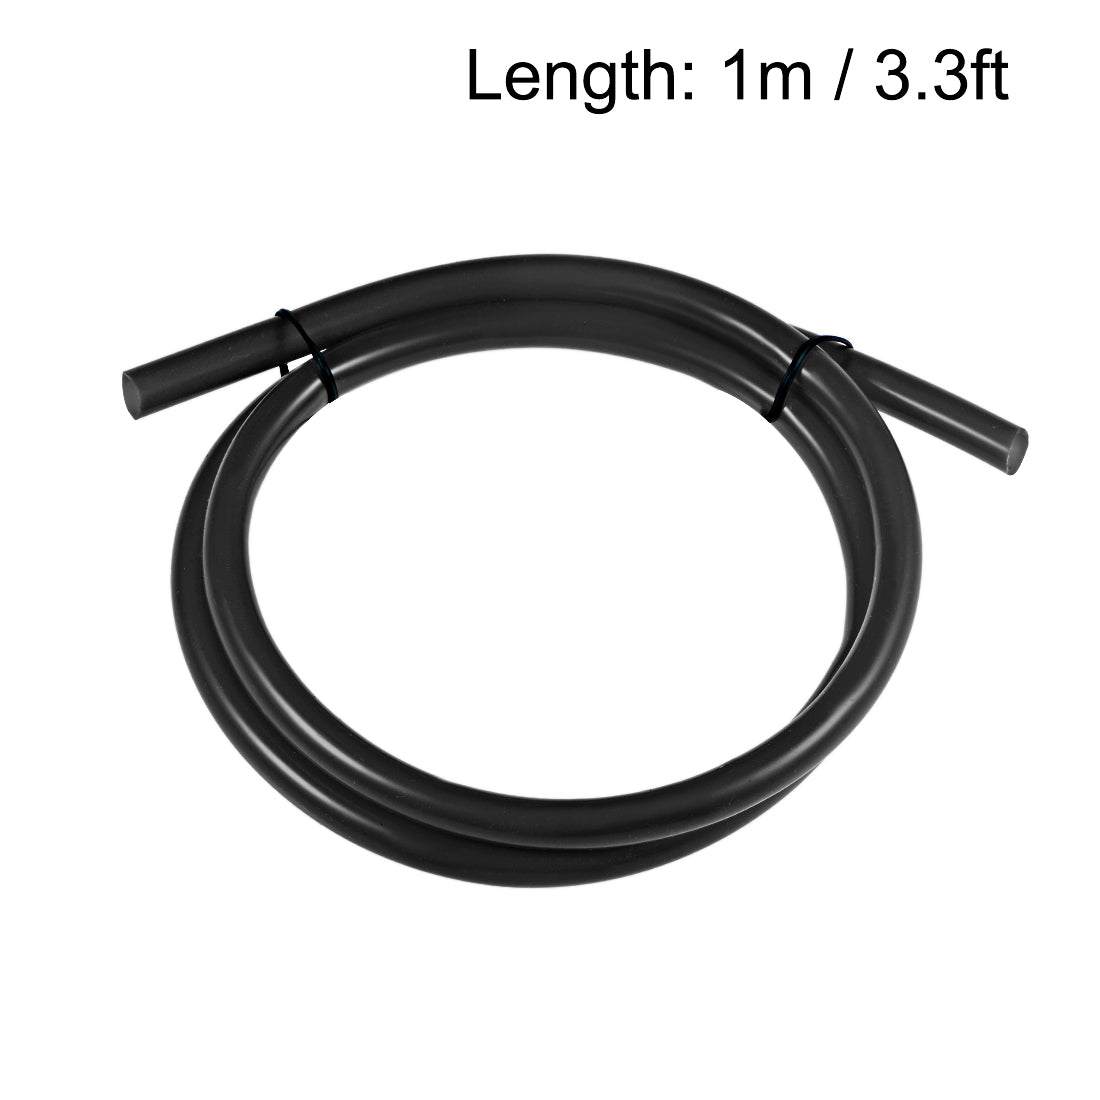 uxcell Uxcell Silicone Tube, 5/16 inch ID x 3/8 inch OD 1m/3.3ft Tubing Black